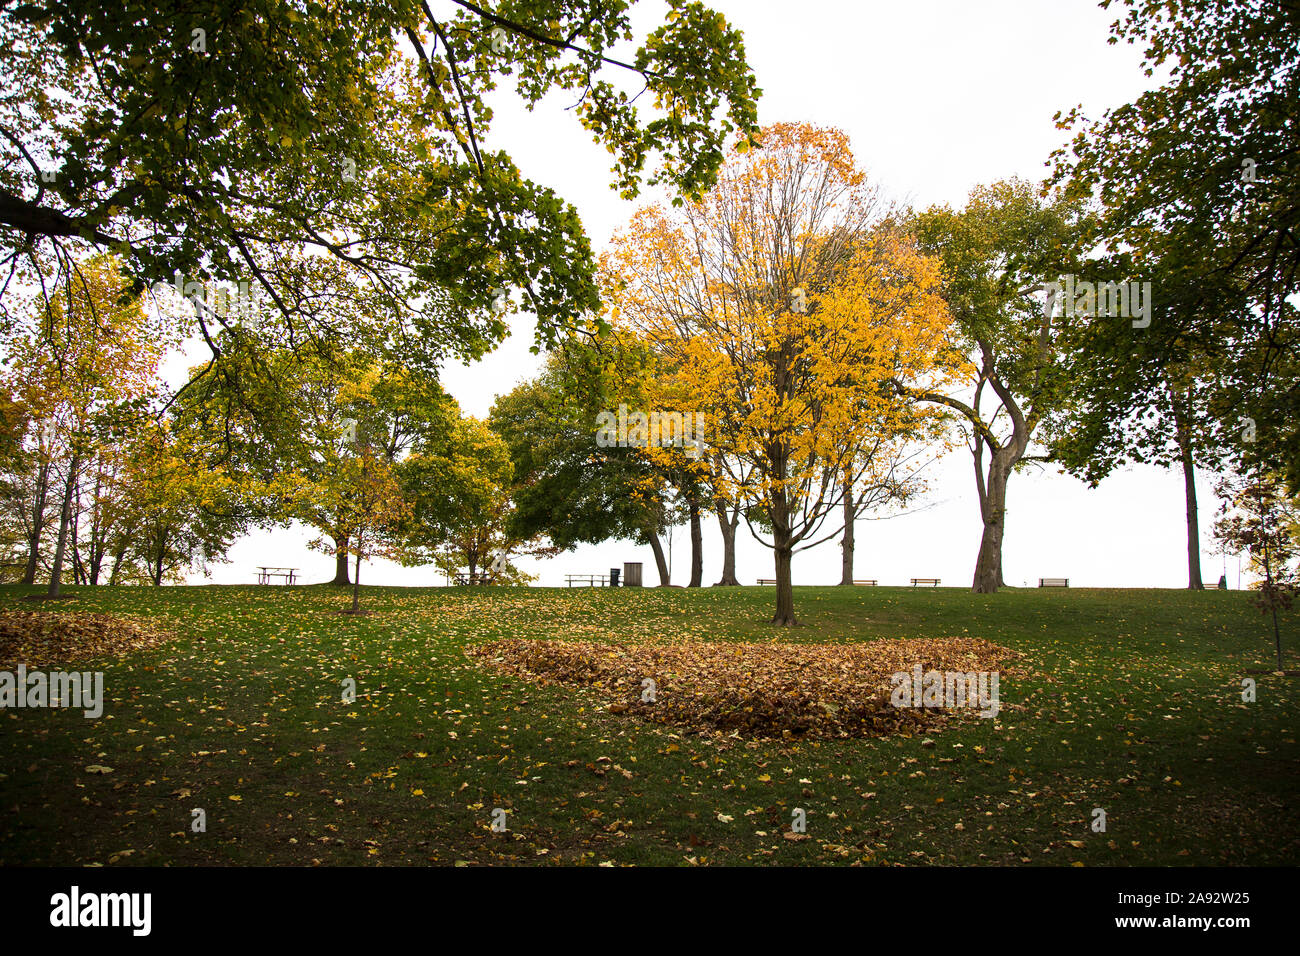 Autumn leaves falling from a tree in a park Stock Photo